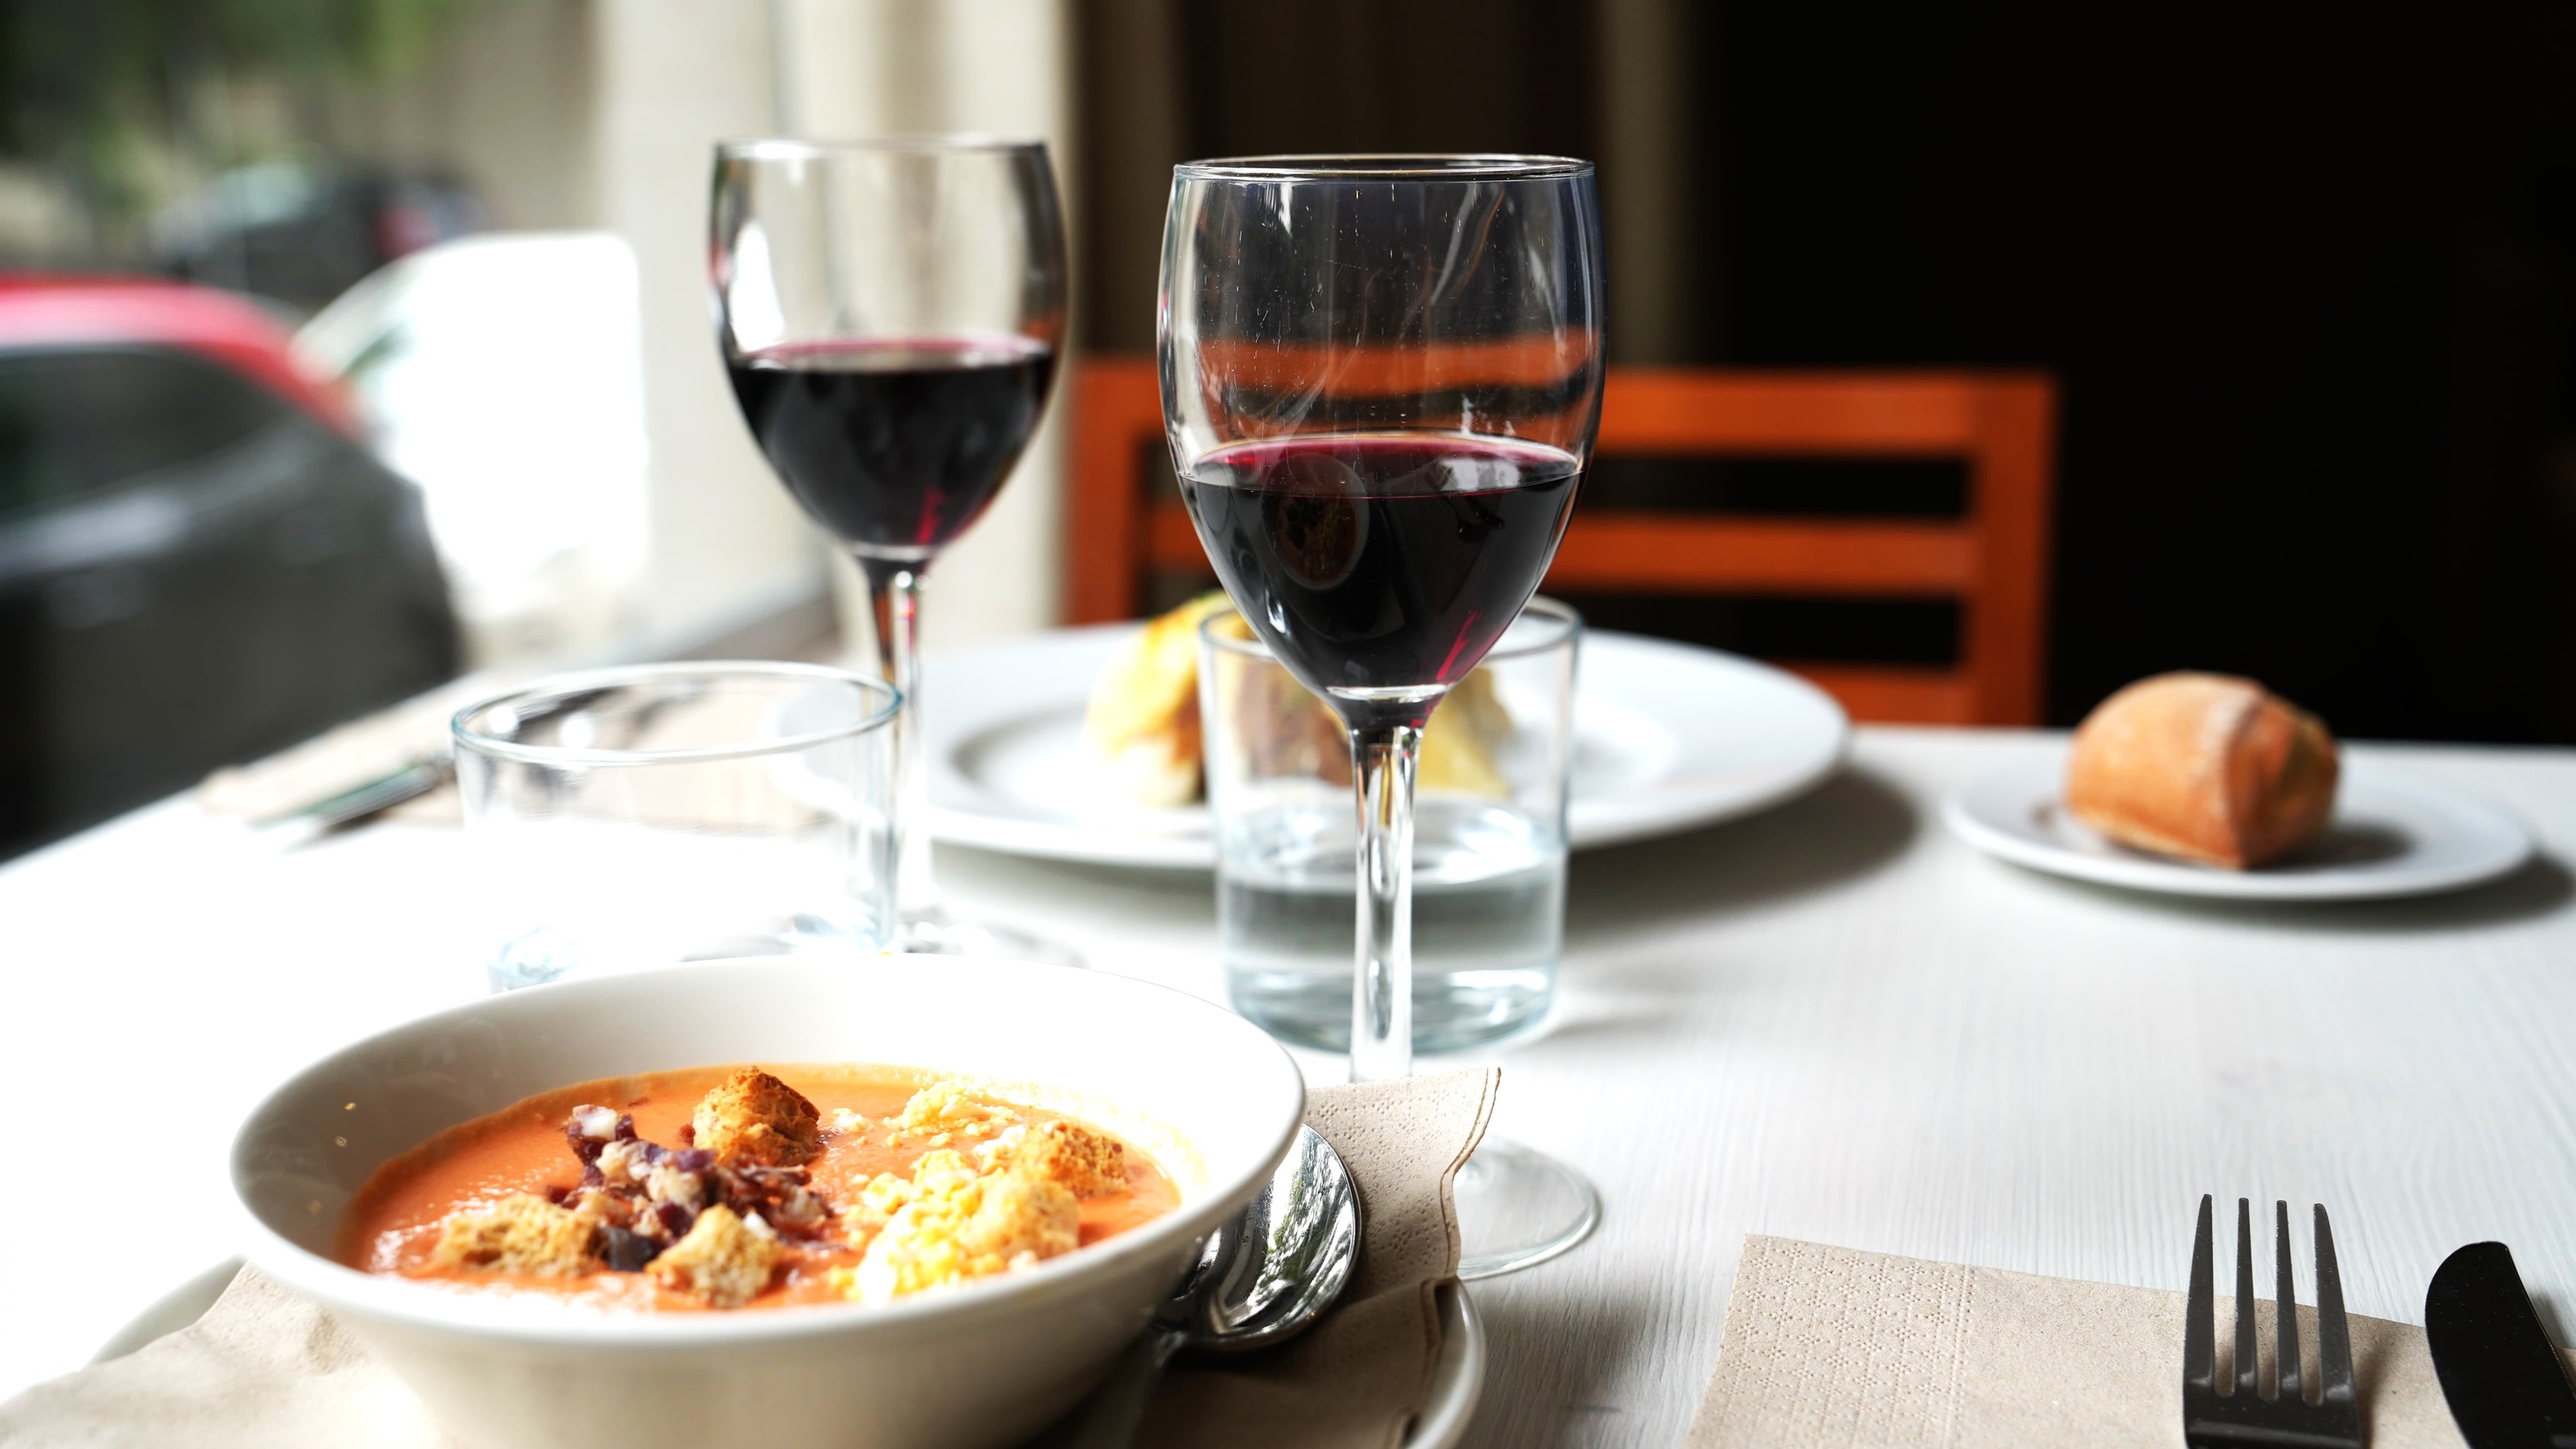 a bowl of soup sits on a table next to two glasses of red wine